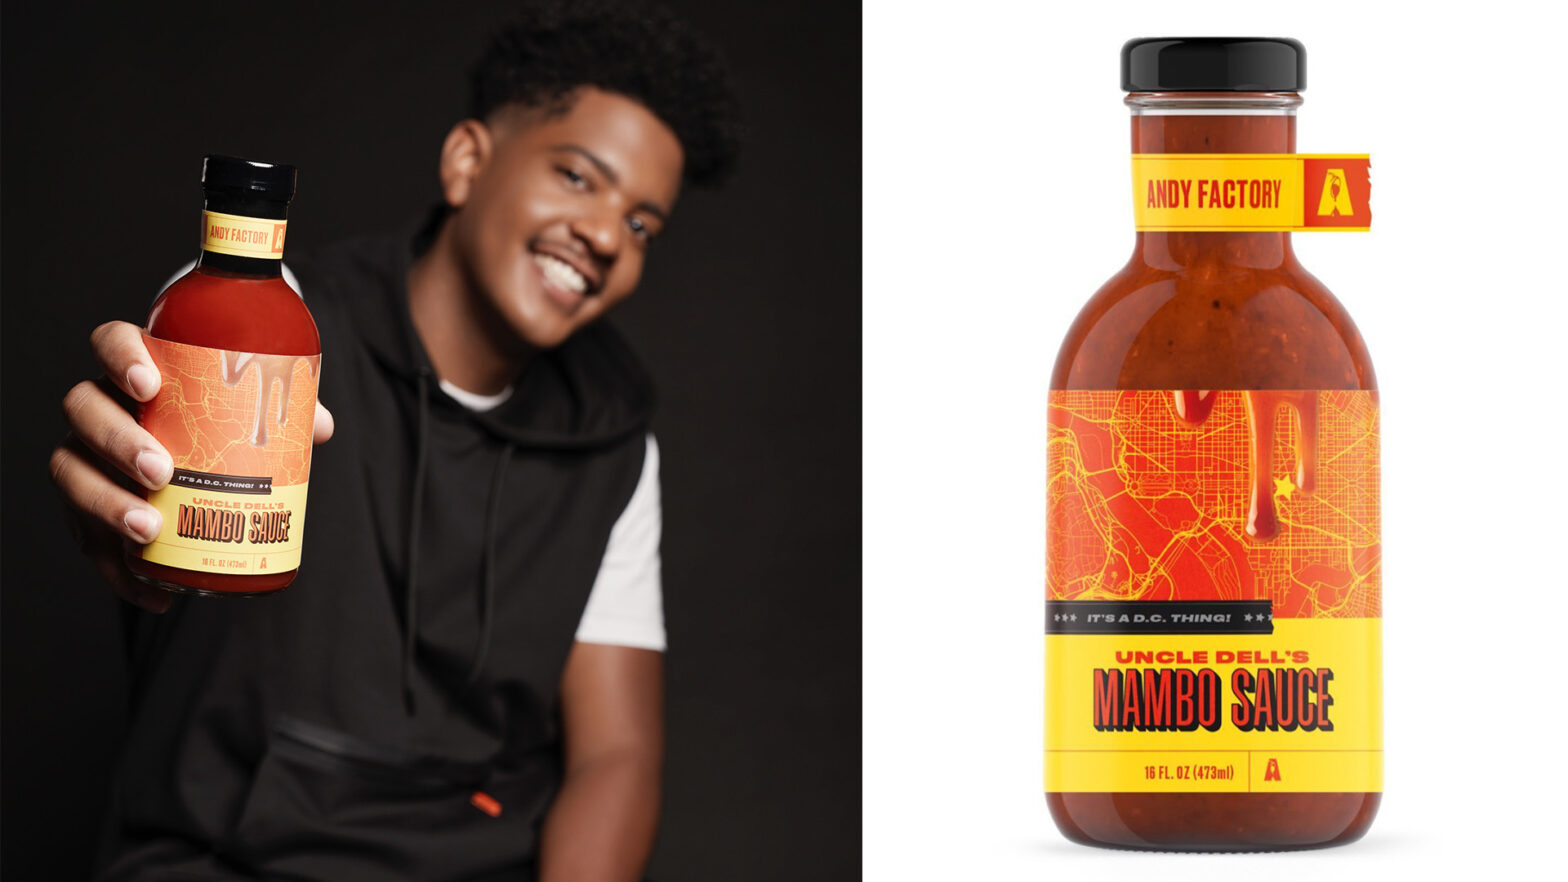 How 19-Year-Old Andy Burton Turned His Uncle Dell's Mambo Sauce Into A Six-Figure Business